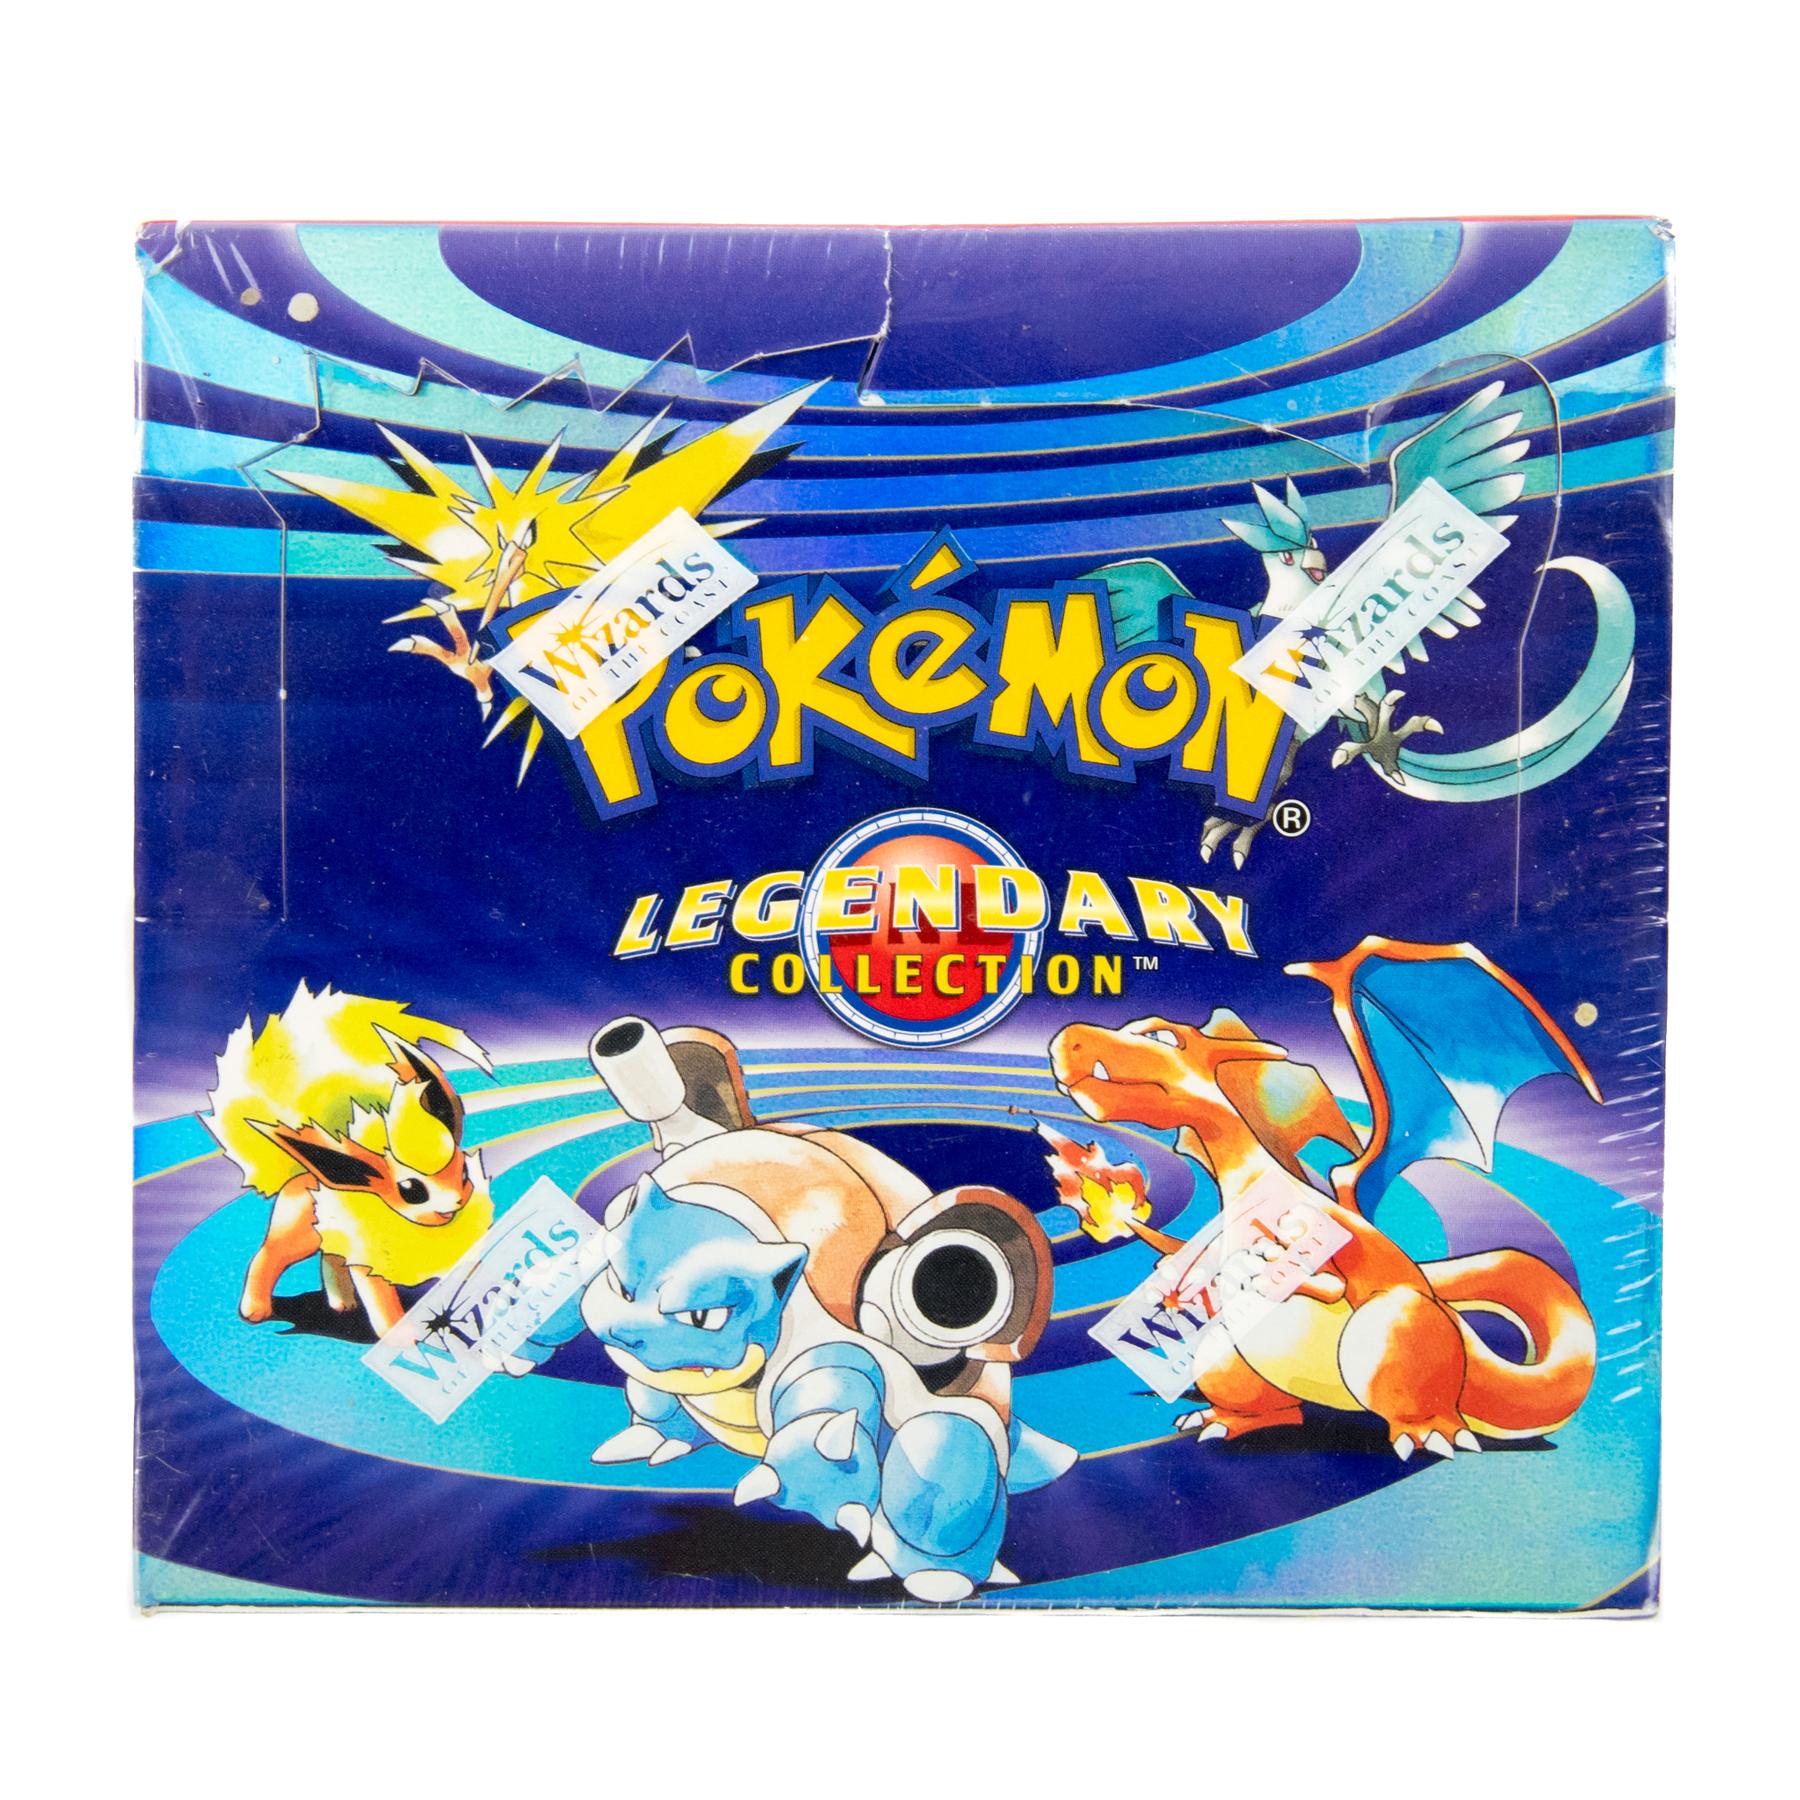 Pokemon Legendary Collection Booster Box